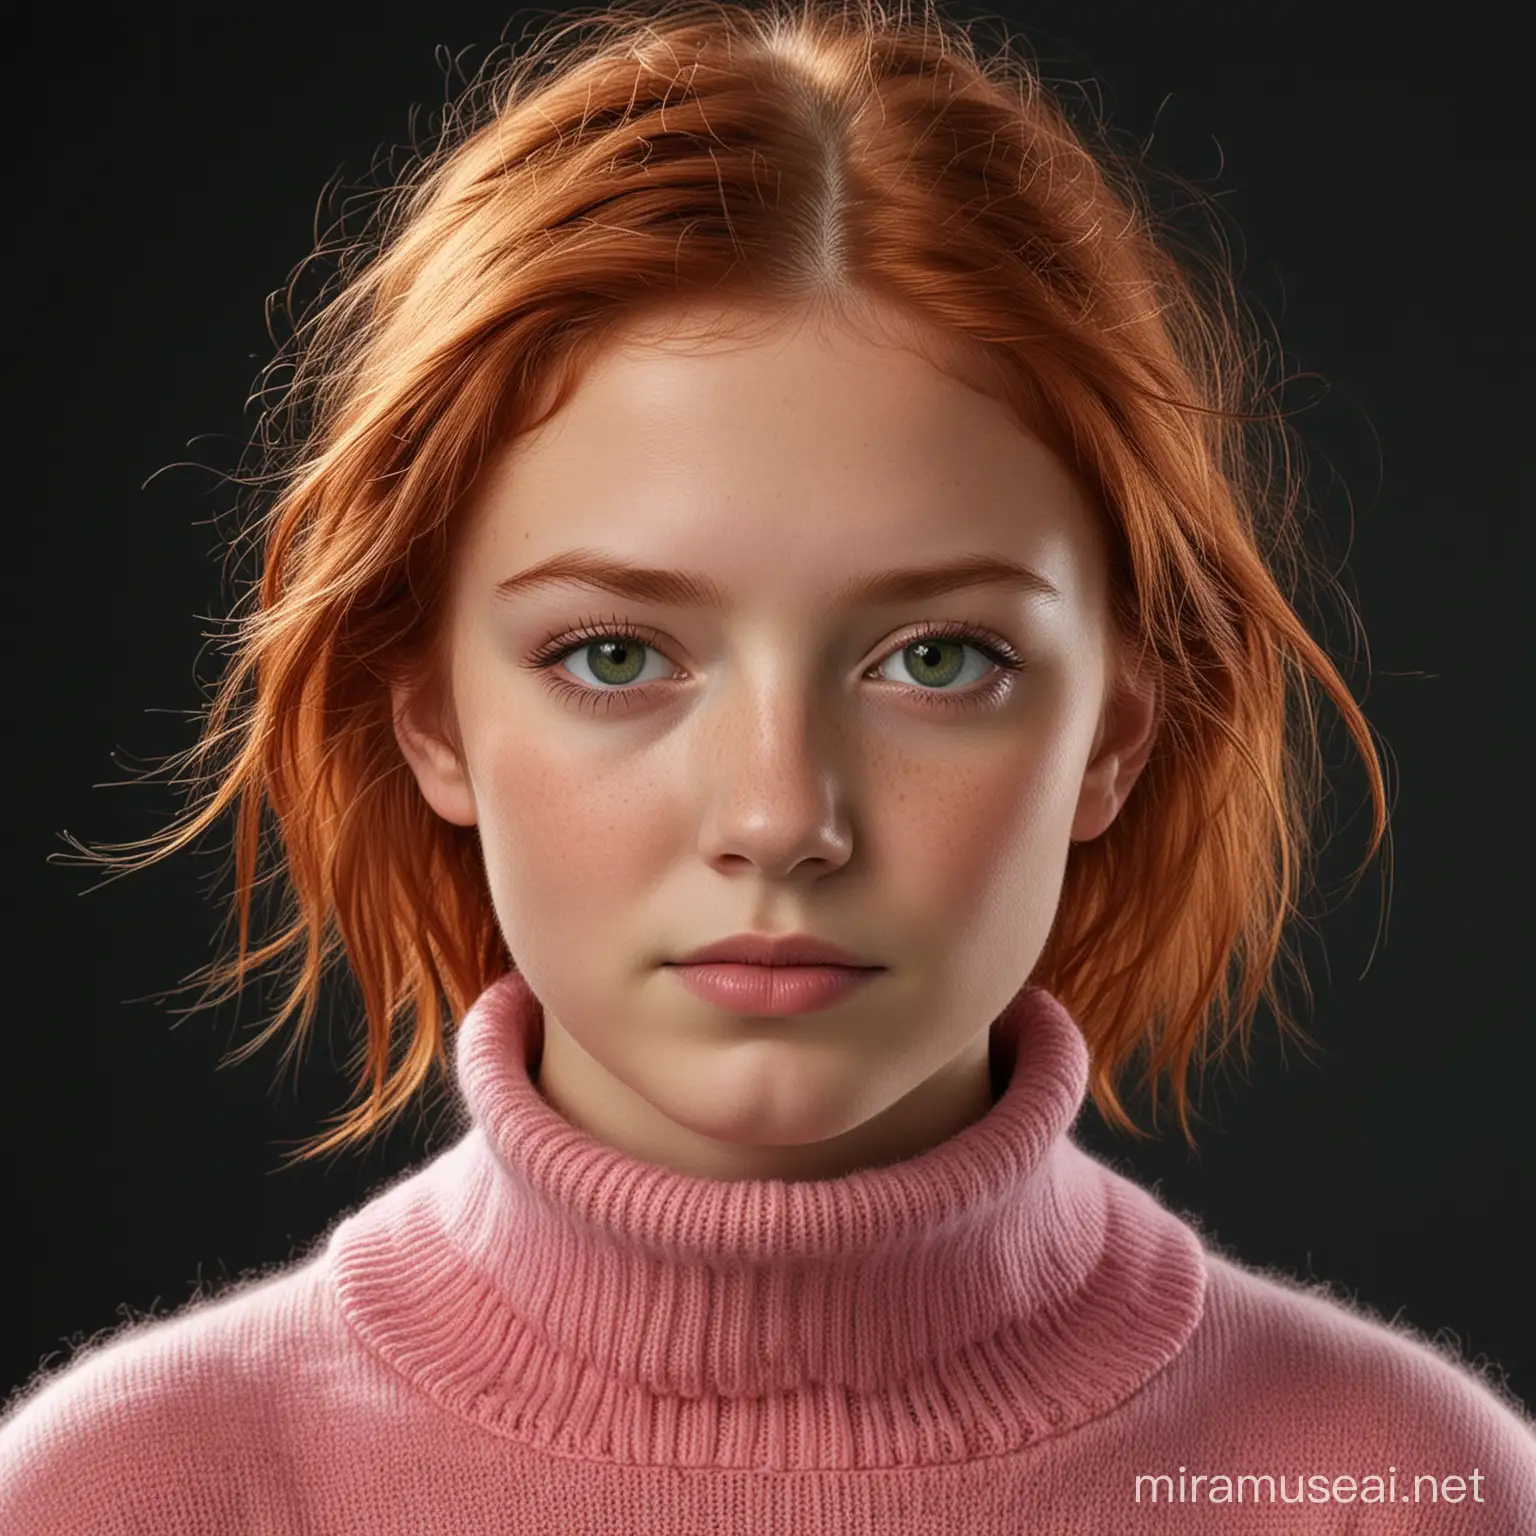 High-resolution photo of a natural-looking young girl with ginger copper red hair and very green eyes, no makeup, against a black background, wearing a thick pink knitted wool polo neck top